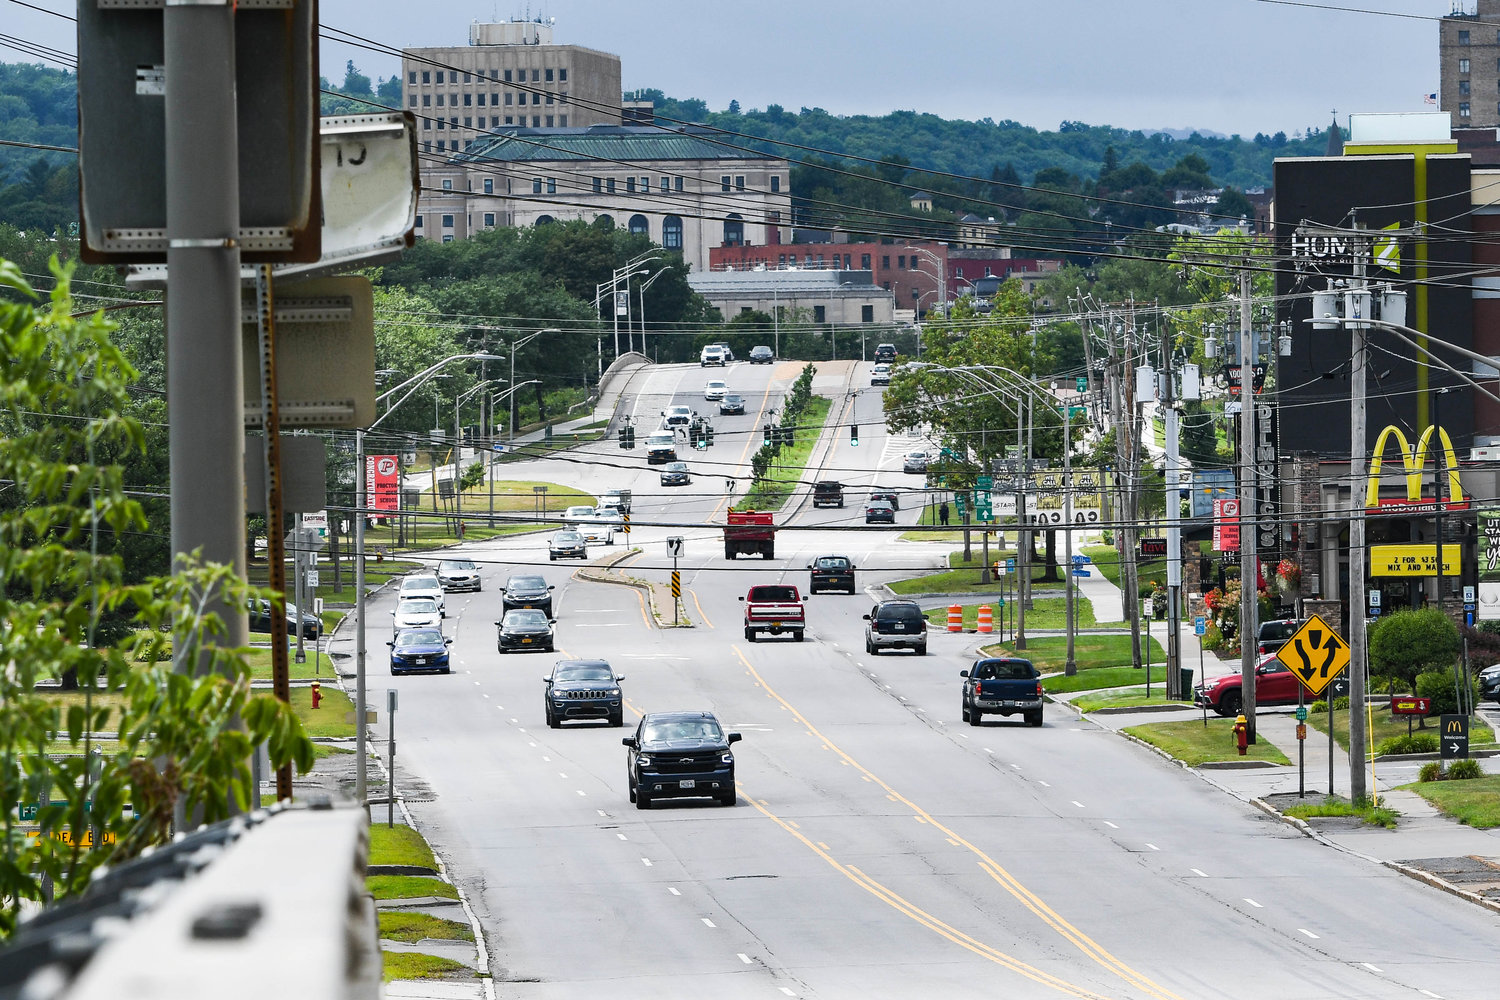 The bridges along North Genesee Street heading toward downtown Utica are expected to be the focus of an $18.2 million grant secured by Senate Majority Leader Chuck Schumer as part of the Rebuilding American Infrastructure with Sustainability and Equity (RAISE) grant program.